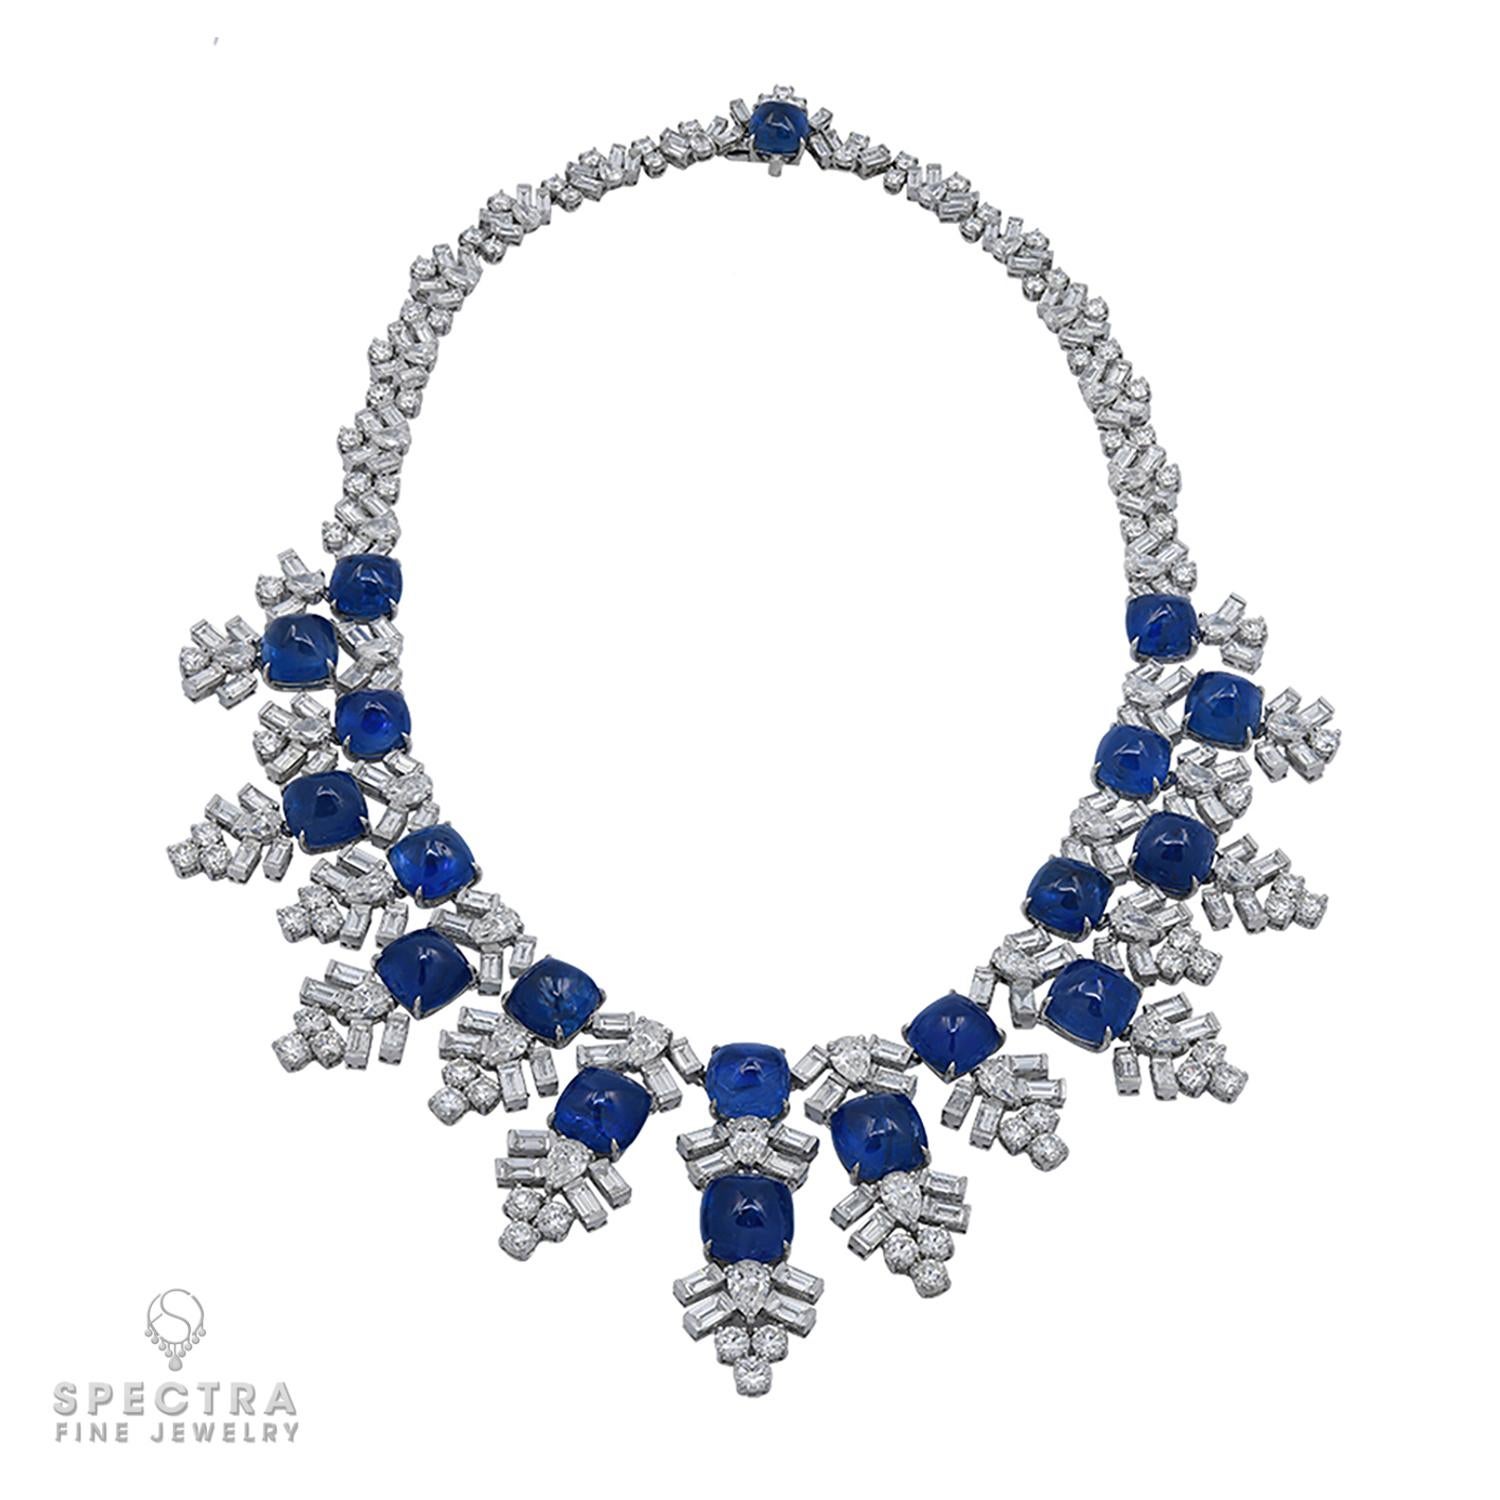 The Harry Winston Jacques Timey Vintage Sapphire Diamond Bib Necklace, crafted in the 20th century, showcases an Art Deco-inspired design in platinum, adorned with a plethora of diamonds and sapphires. Measuring 17.32 inches (44 cm) in length, it